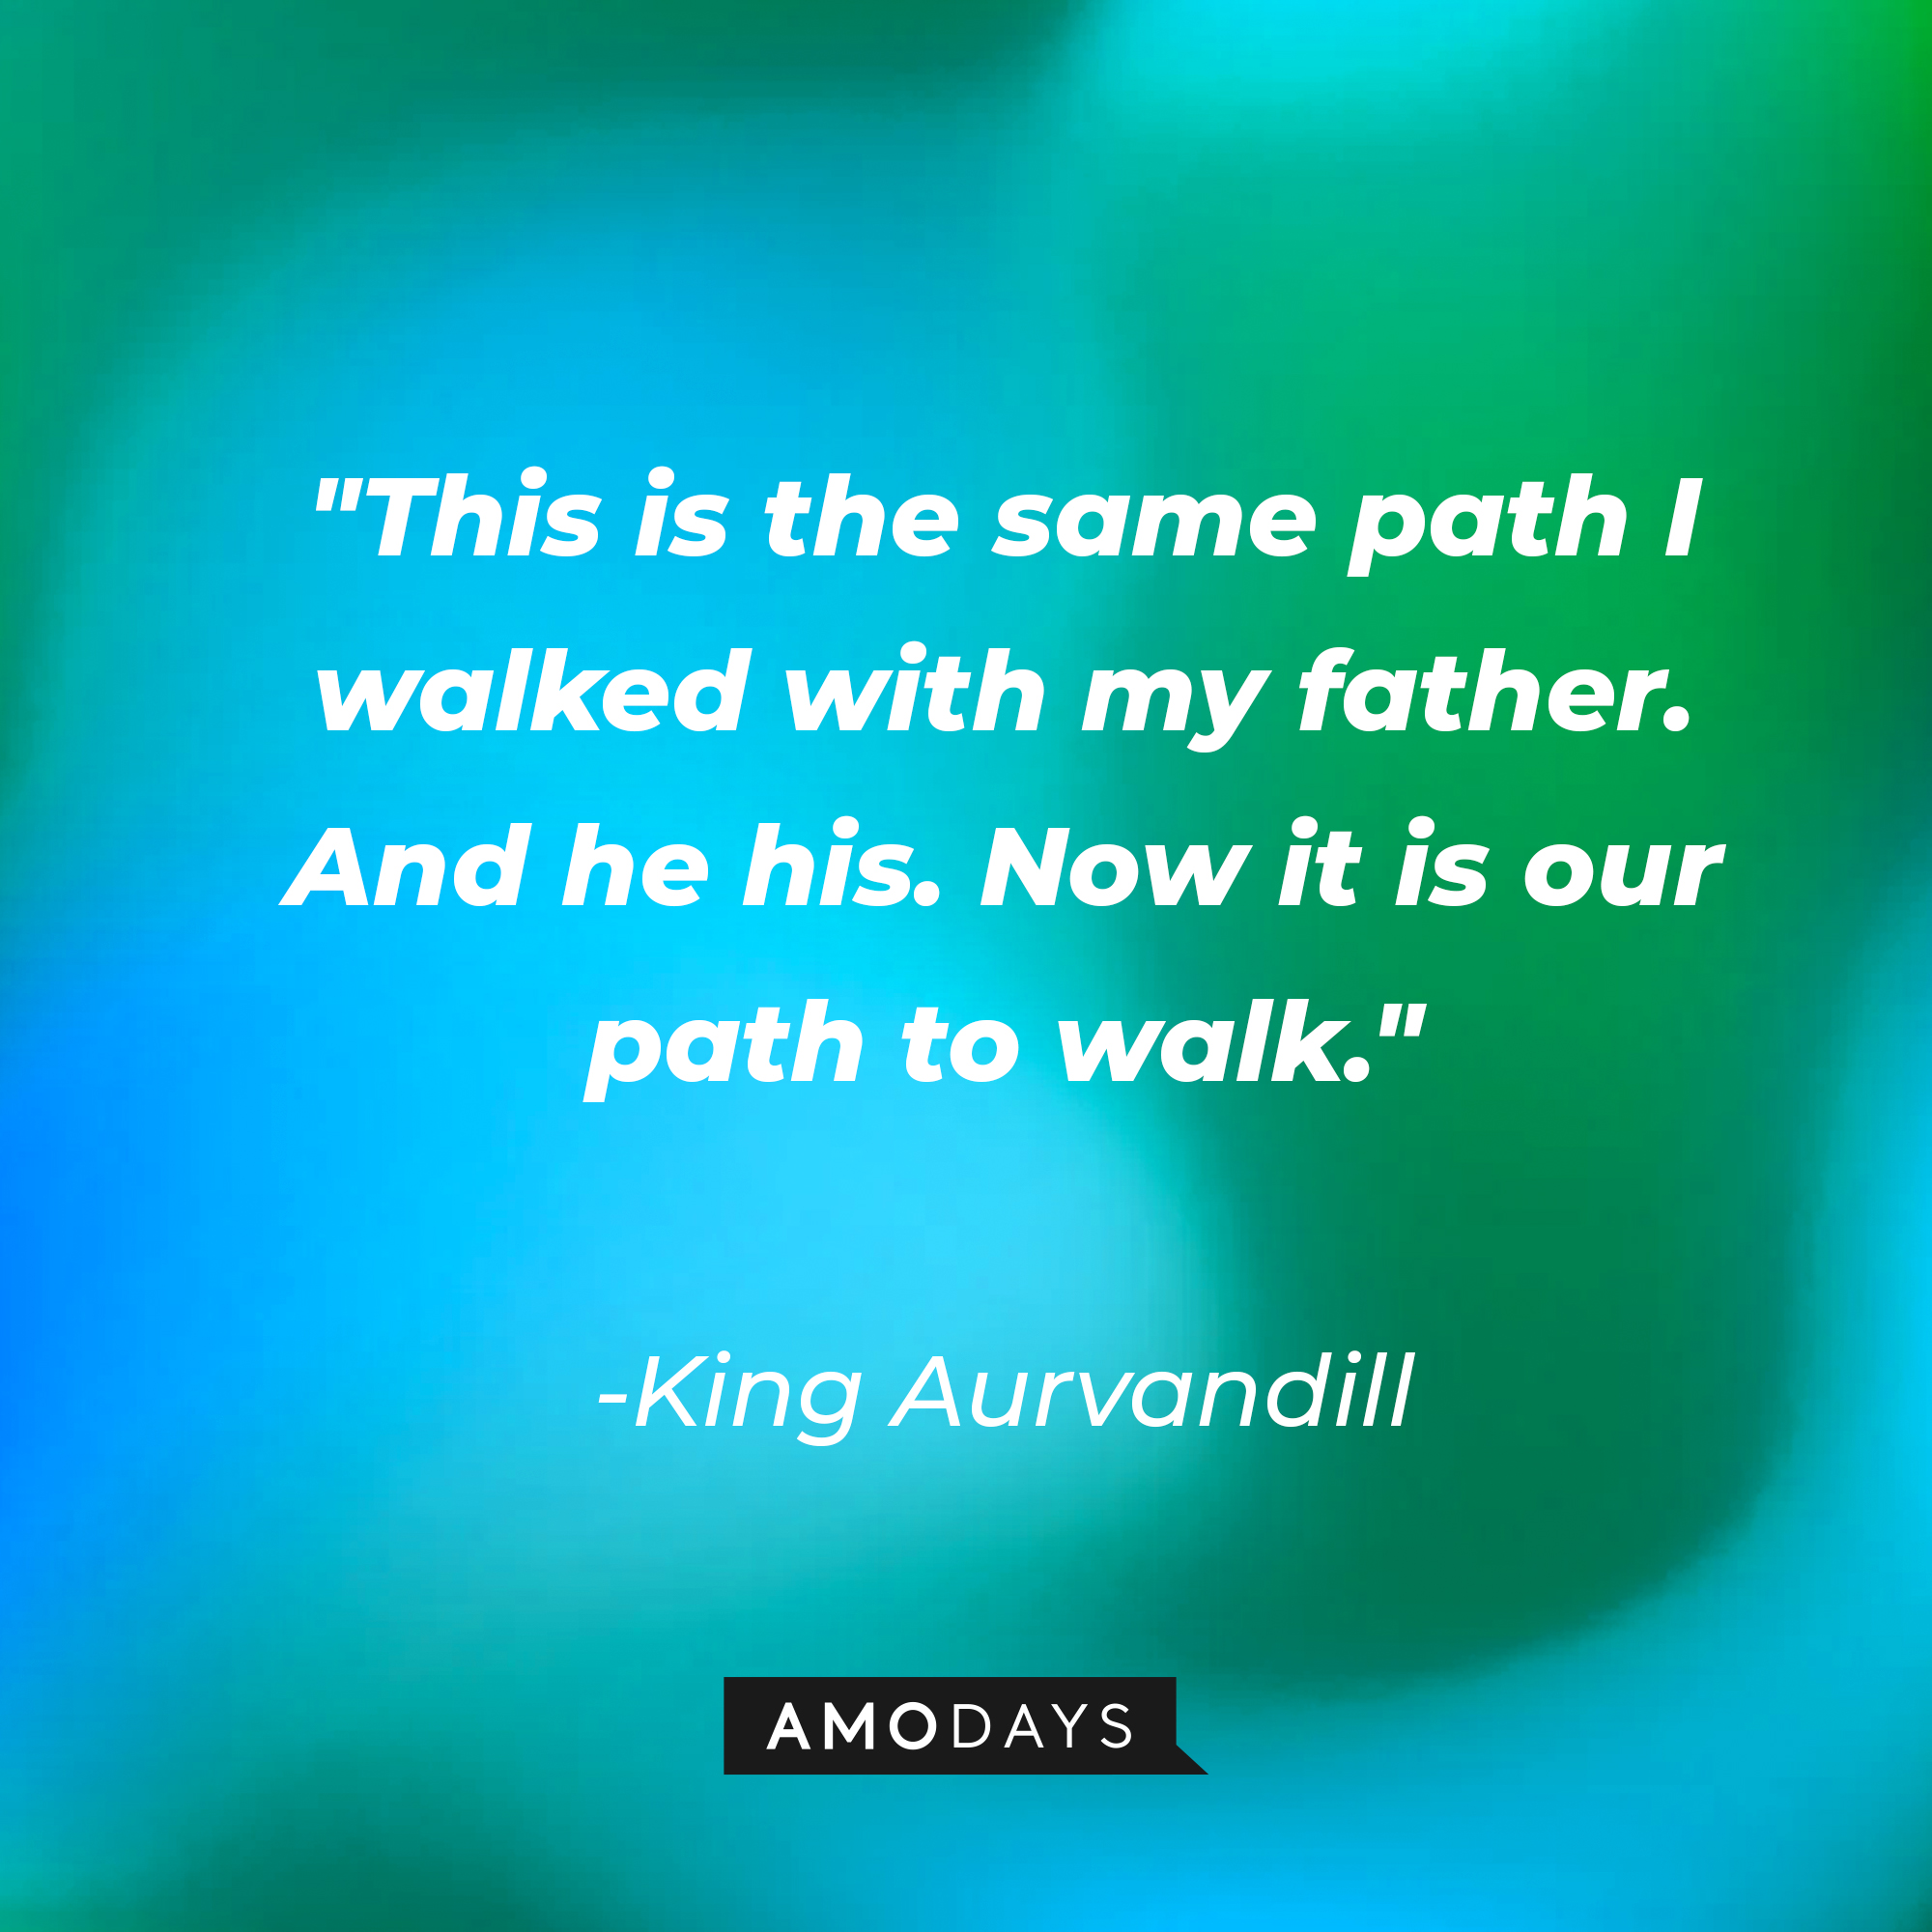 King Aurvandill's quote: "This is the same path I walked with my father. And he his. Now it is our path to walk." | Source: AmoDays